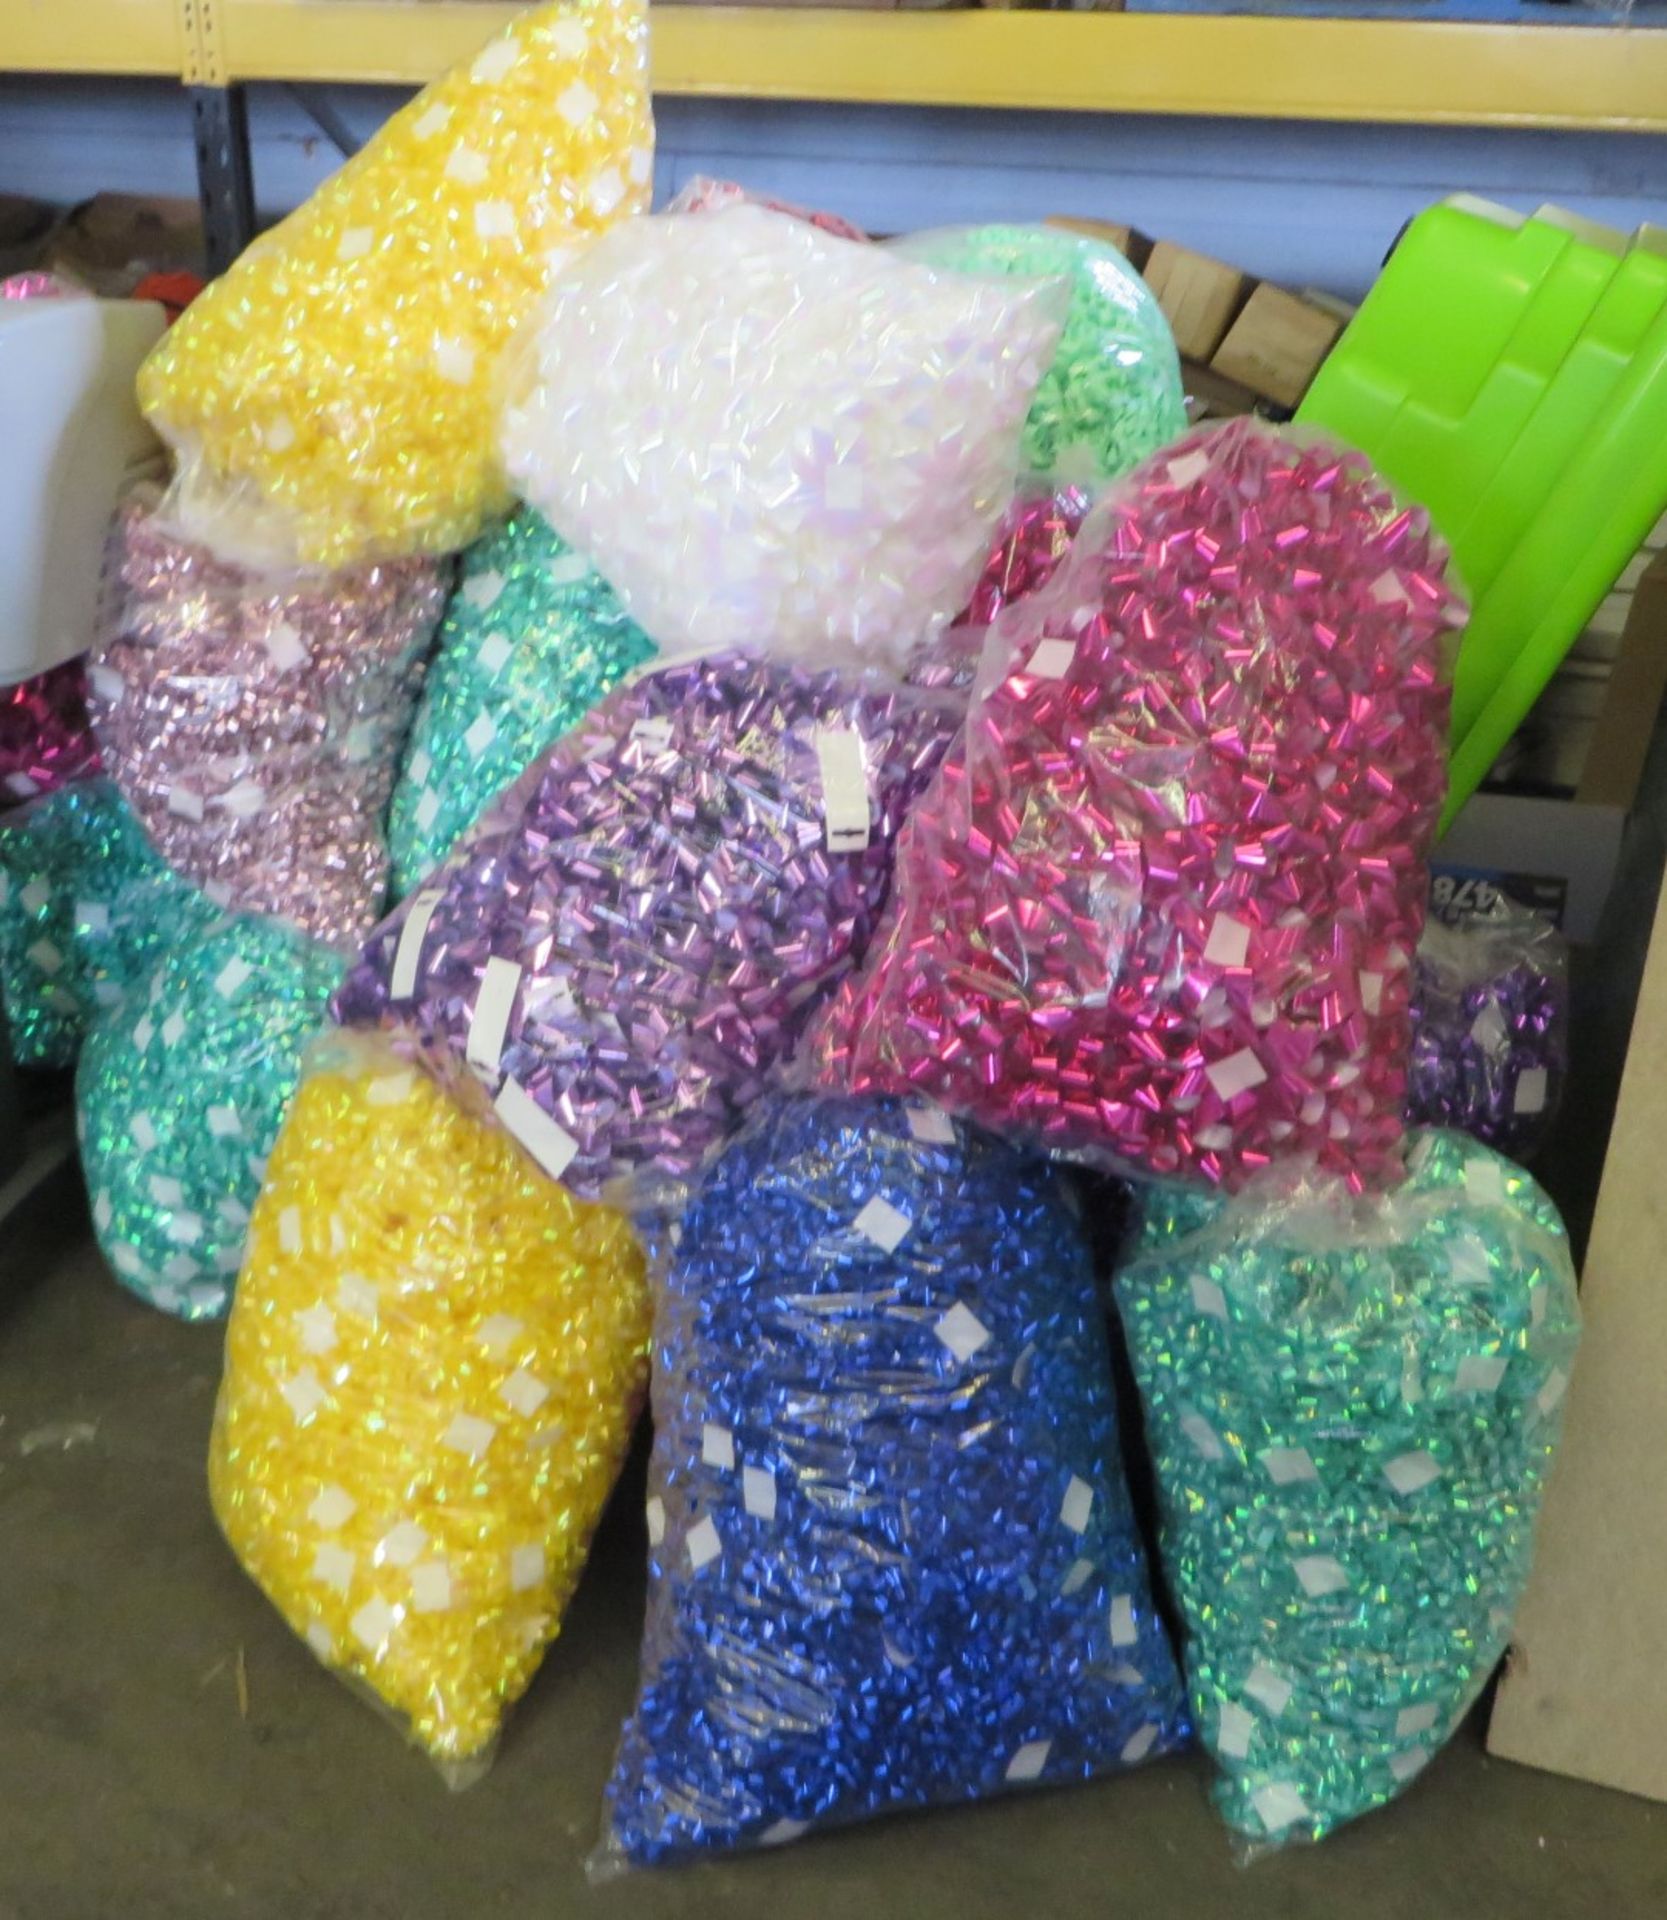 5 x Random Colour Large Bags of New Self-Adhesive Present Bows - CL185 - Ref: DSYBOWS - Location: St - Image 2 of 6